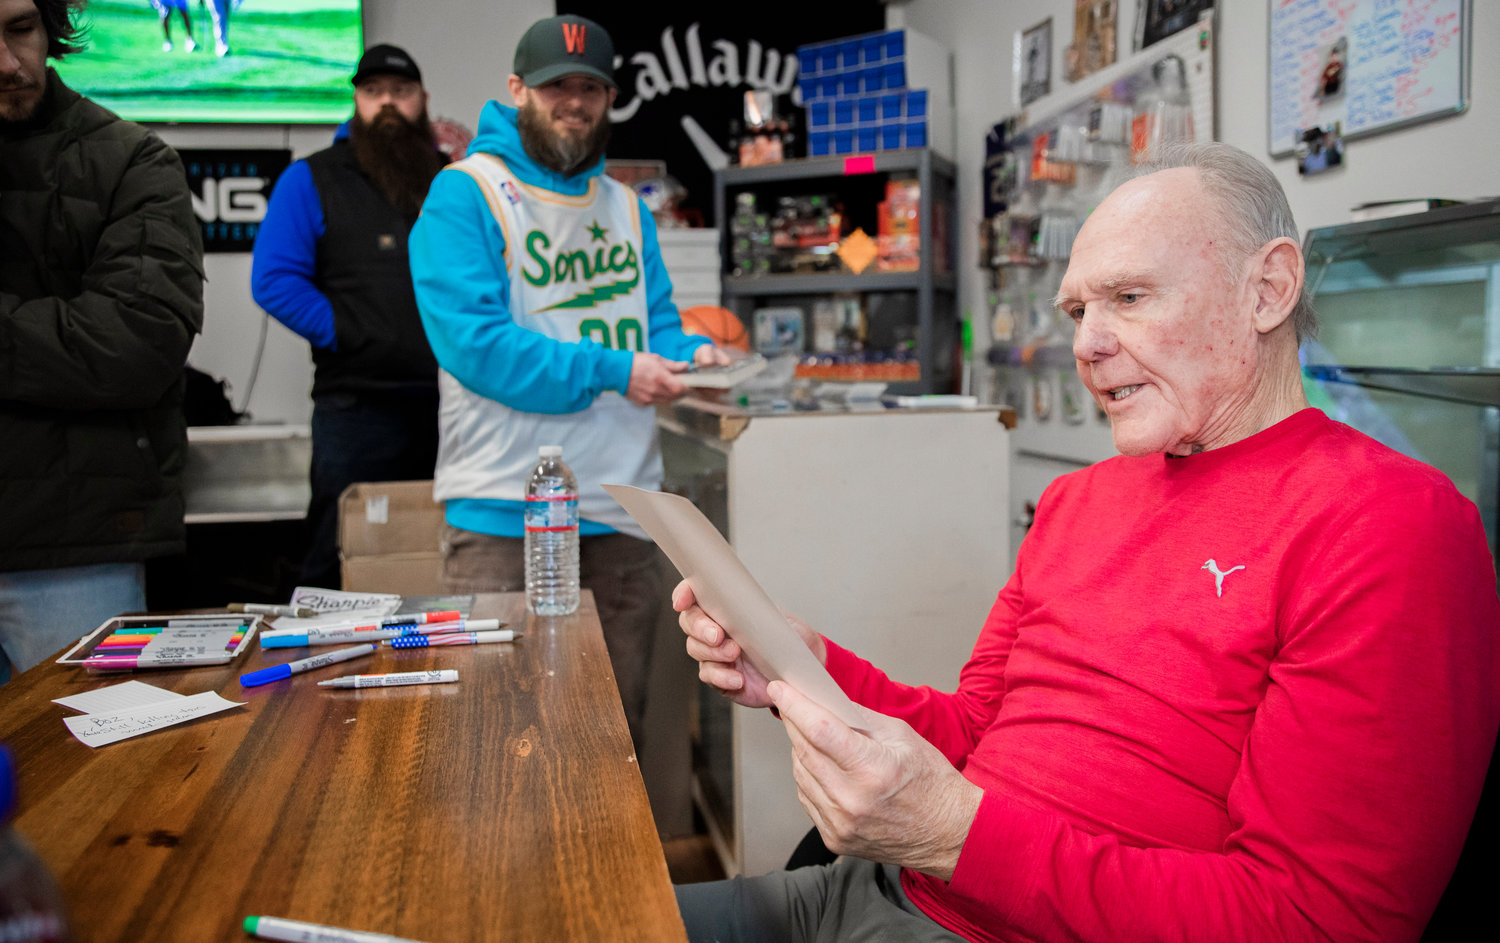 George Karl, who was inducted the Naismith Memorial Basketball Hall of Fame in 2022, looks over a poster while naming off players before signing an autograph on Friday at Keiper’s Cards in Centralia.